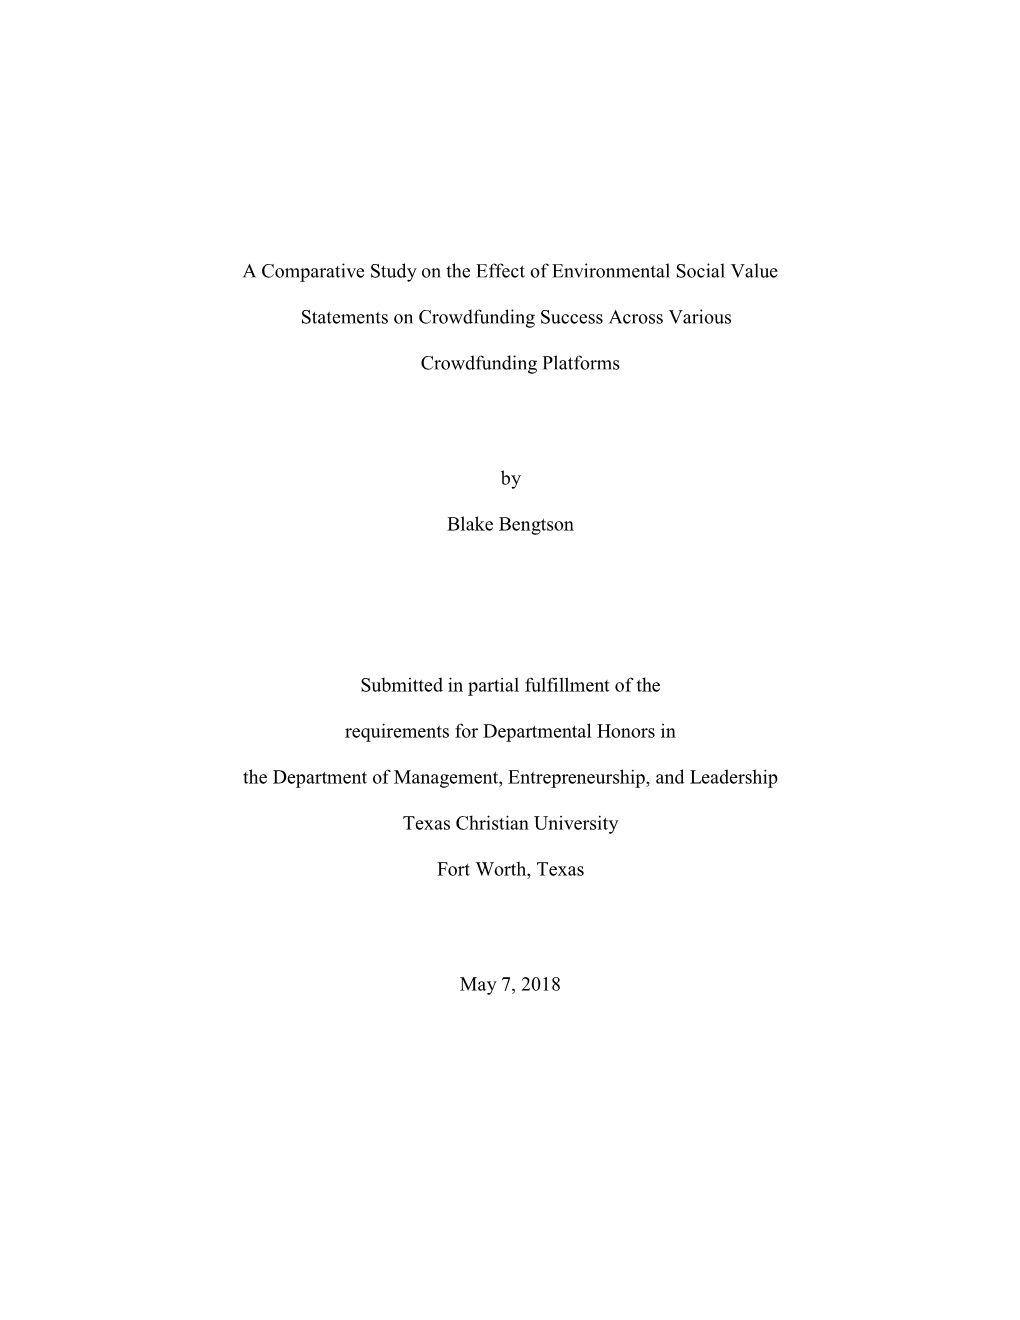 A Comparative Study on the Effect of Environmental Social Value